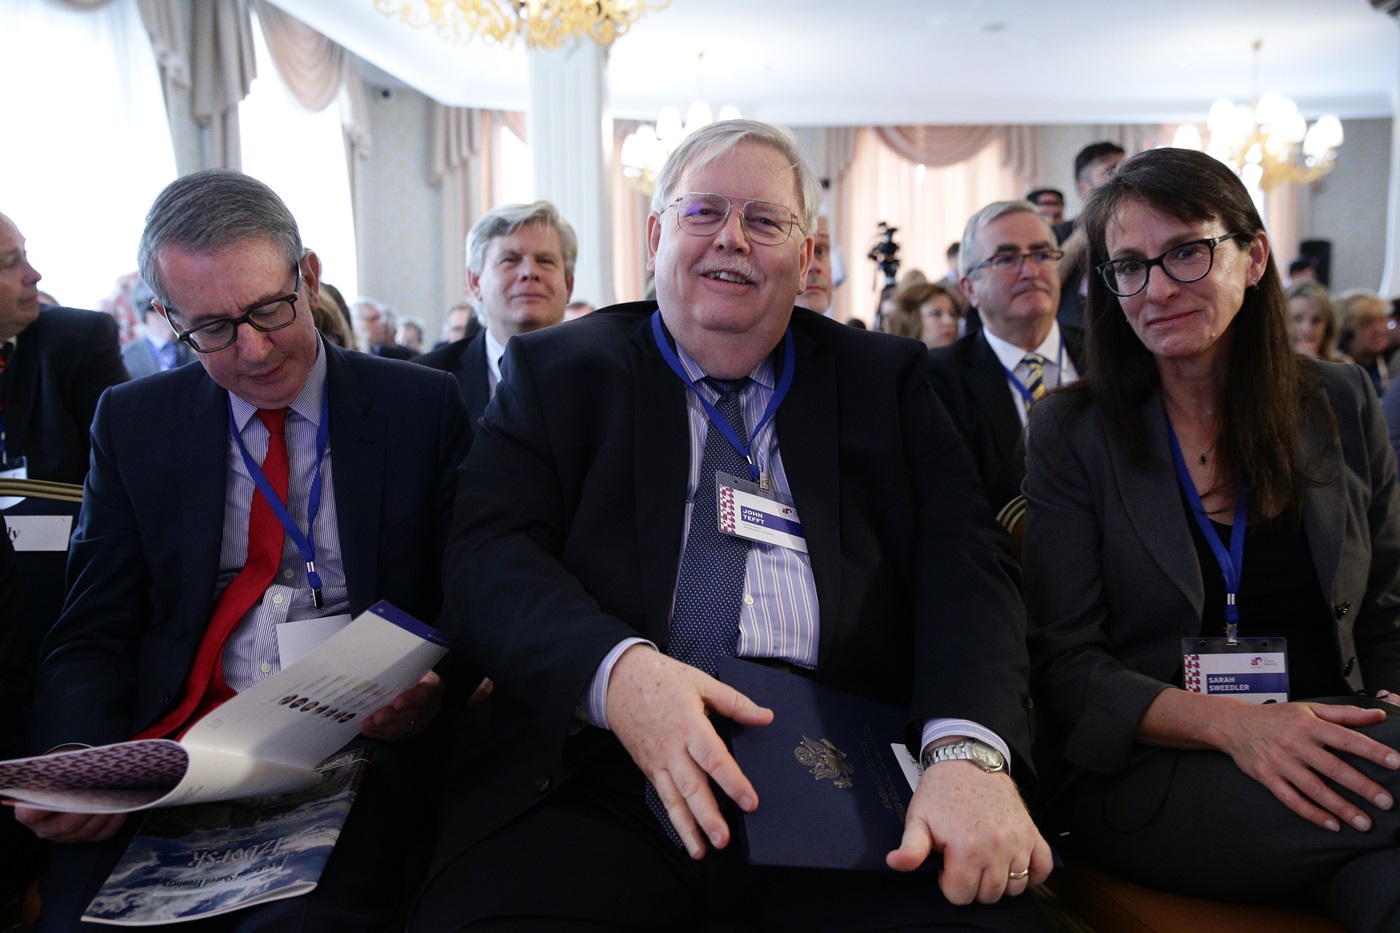 U.S. Ambassador to Russia John Tefft is happy to see his compatriots.\n